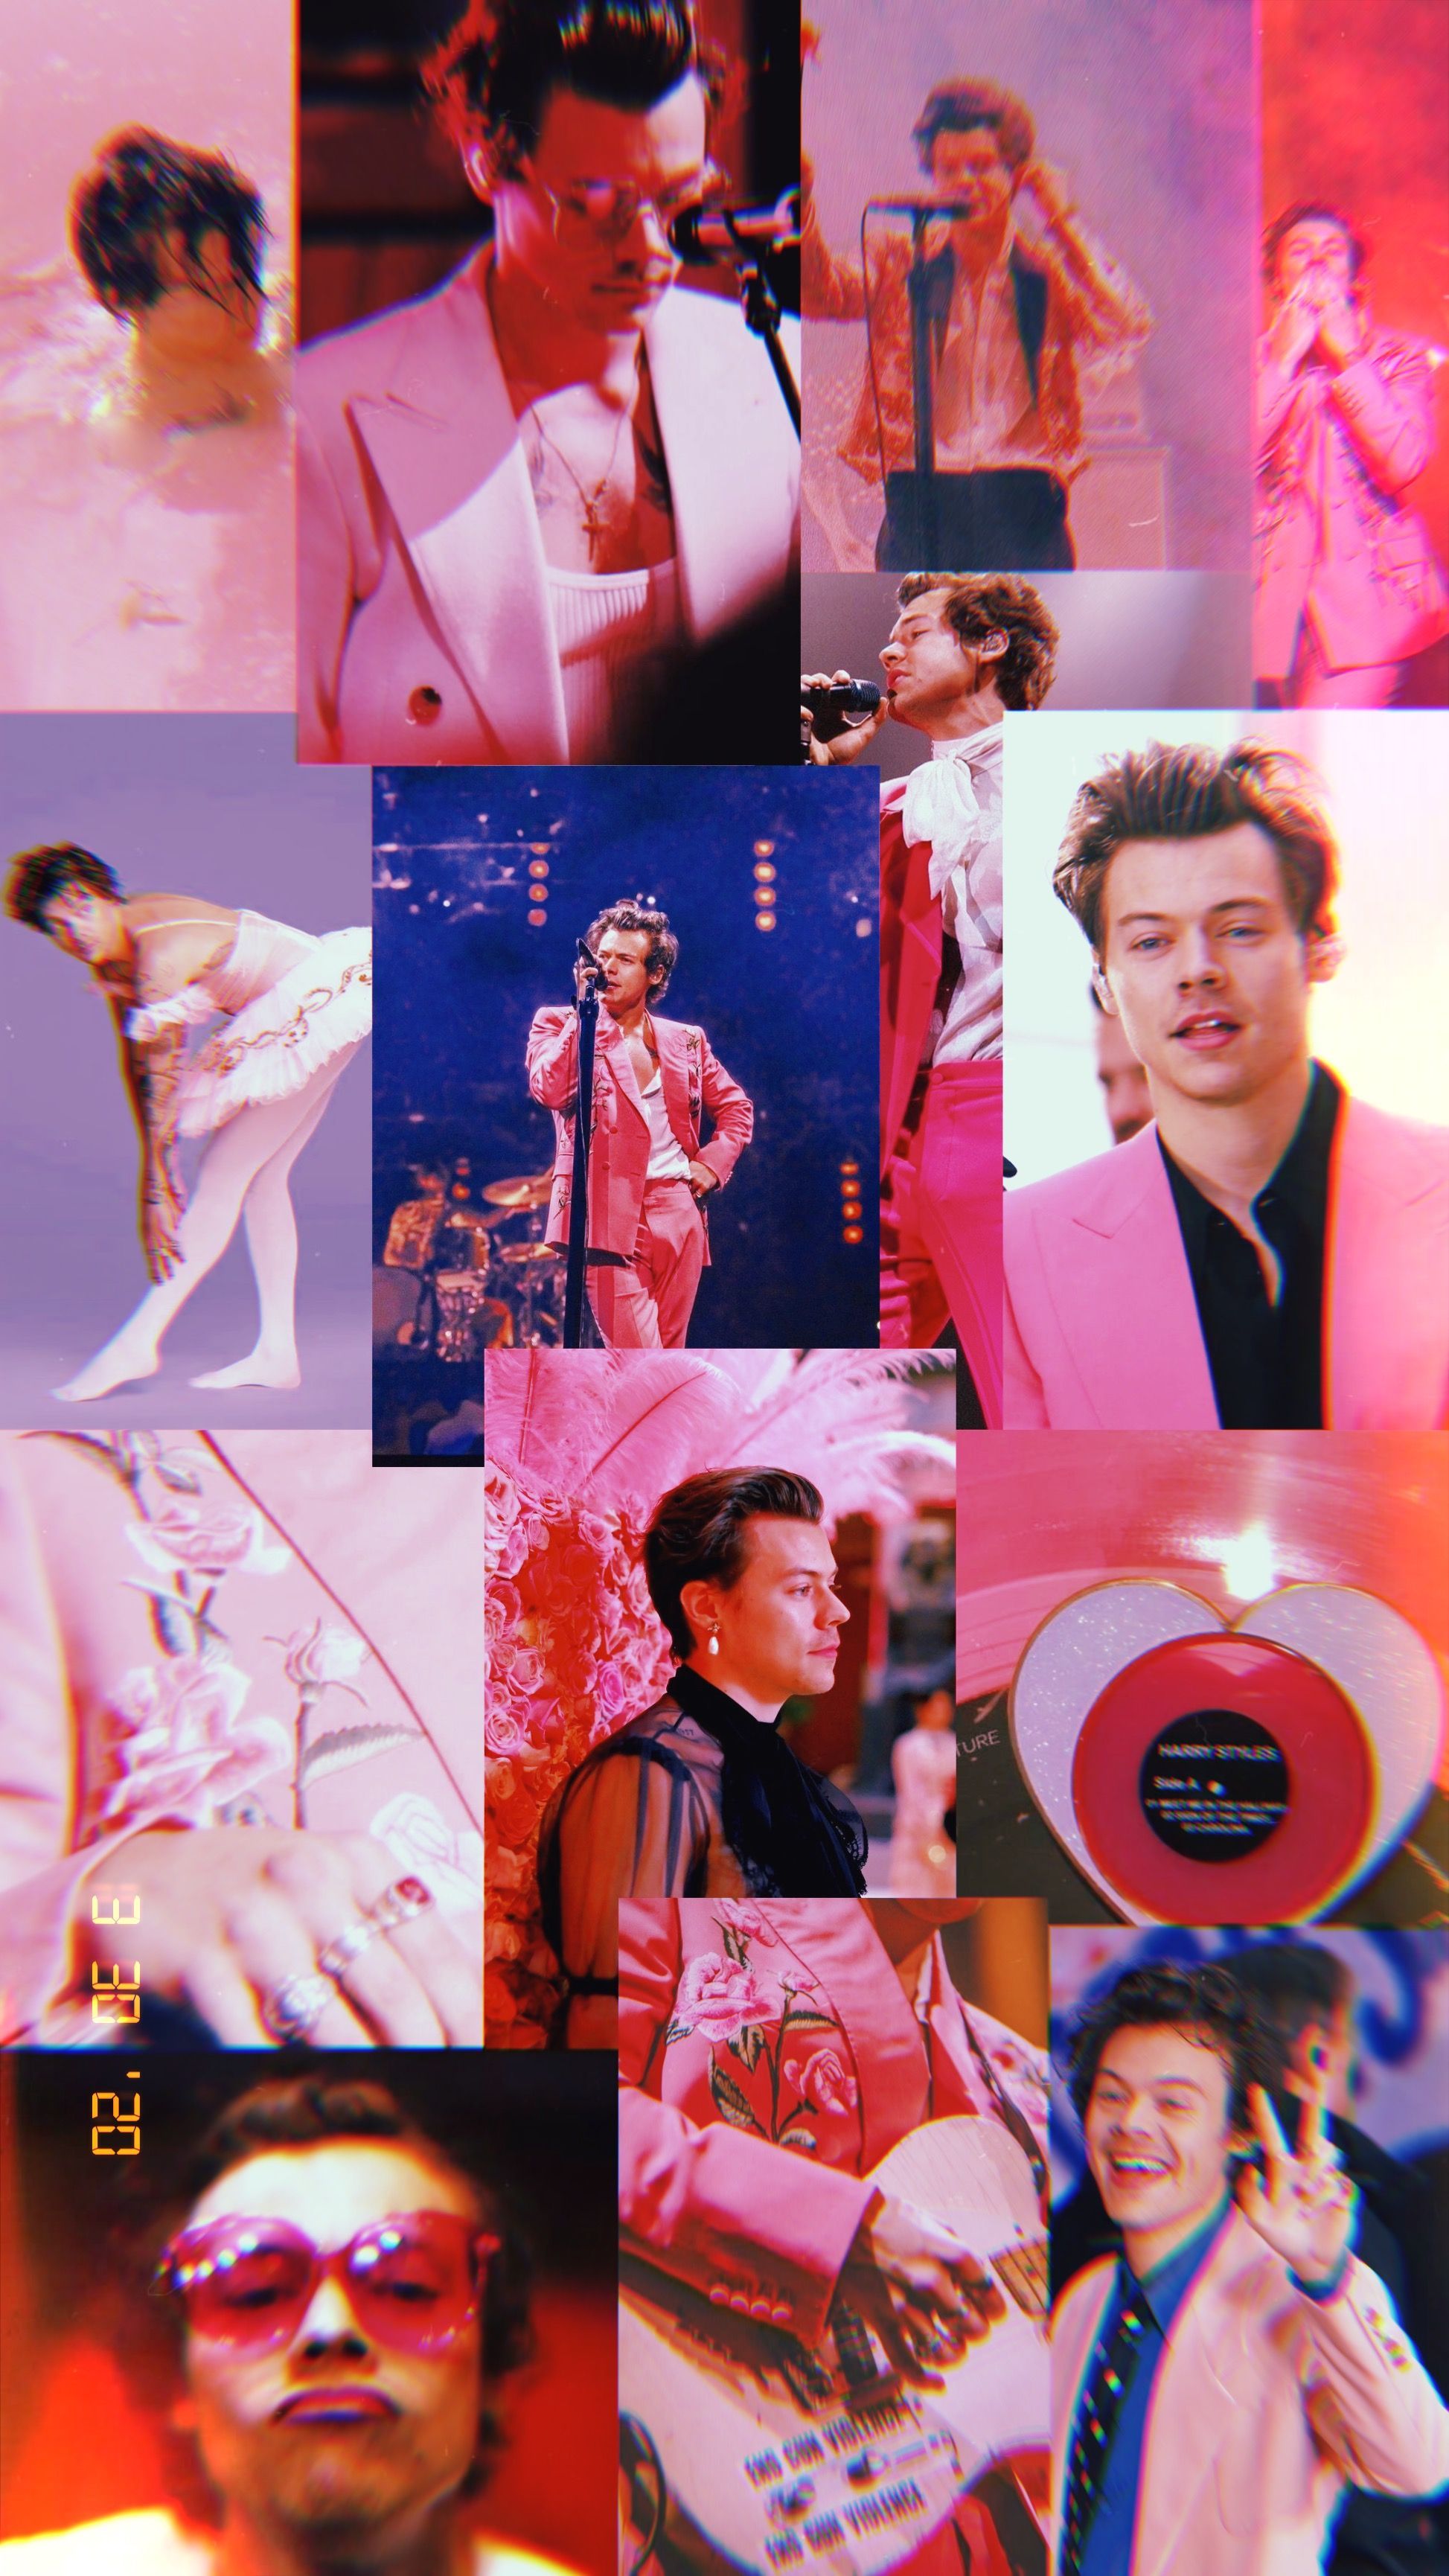 Harry Styles wallpaper I made for my phone! - Harry Styles